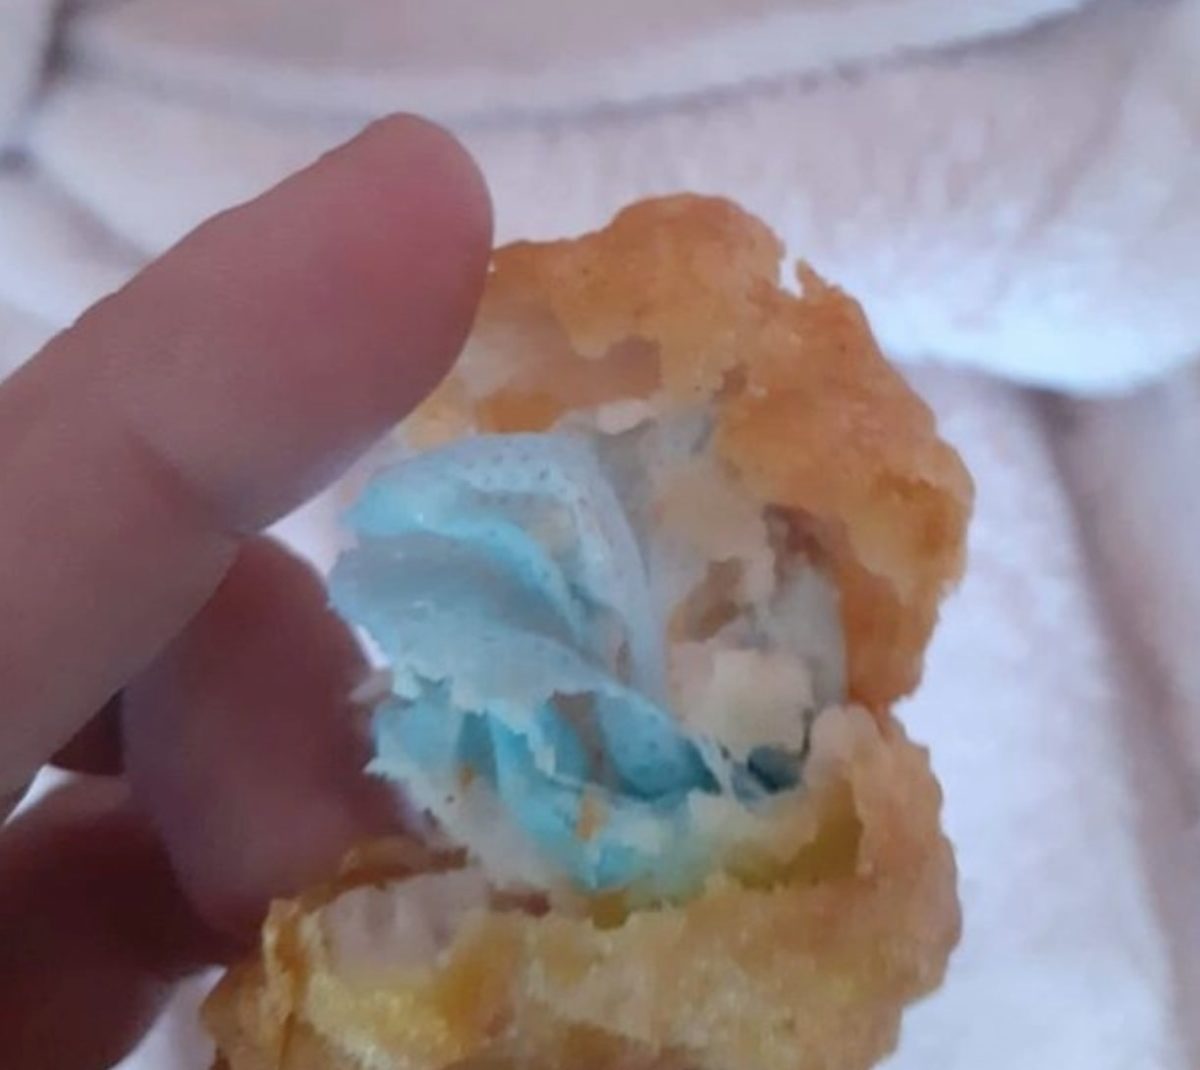 Six-Year-Old Chokes On Blue Face Mask In McDonald’s Nuggets'